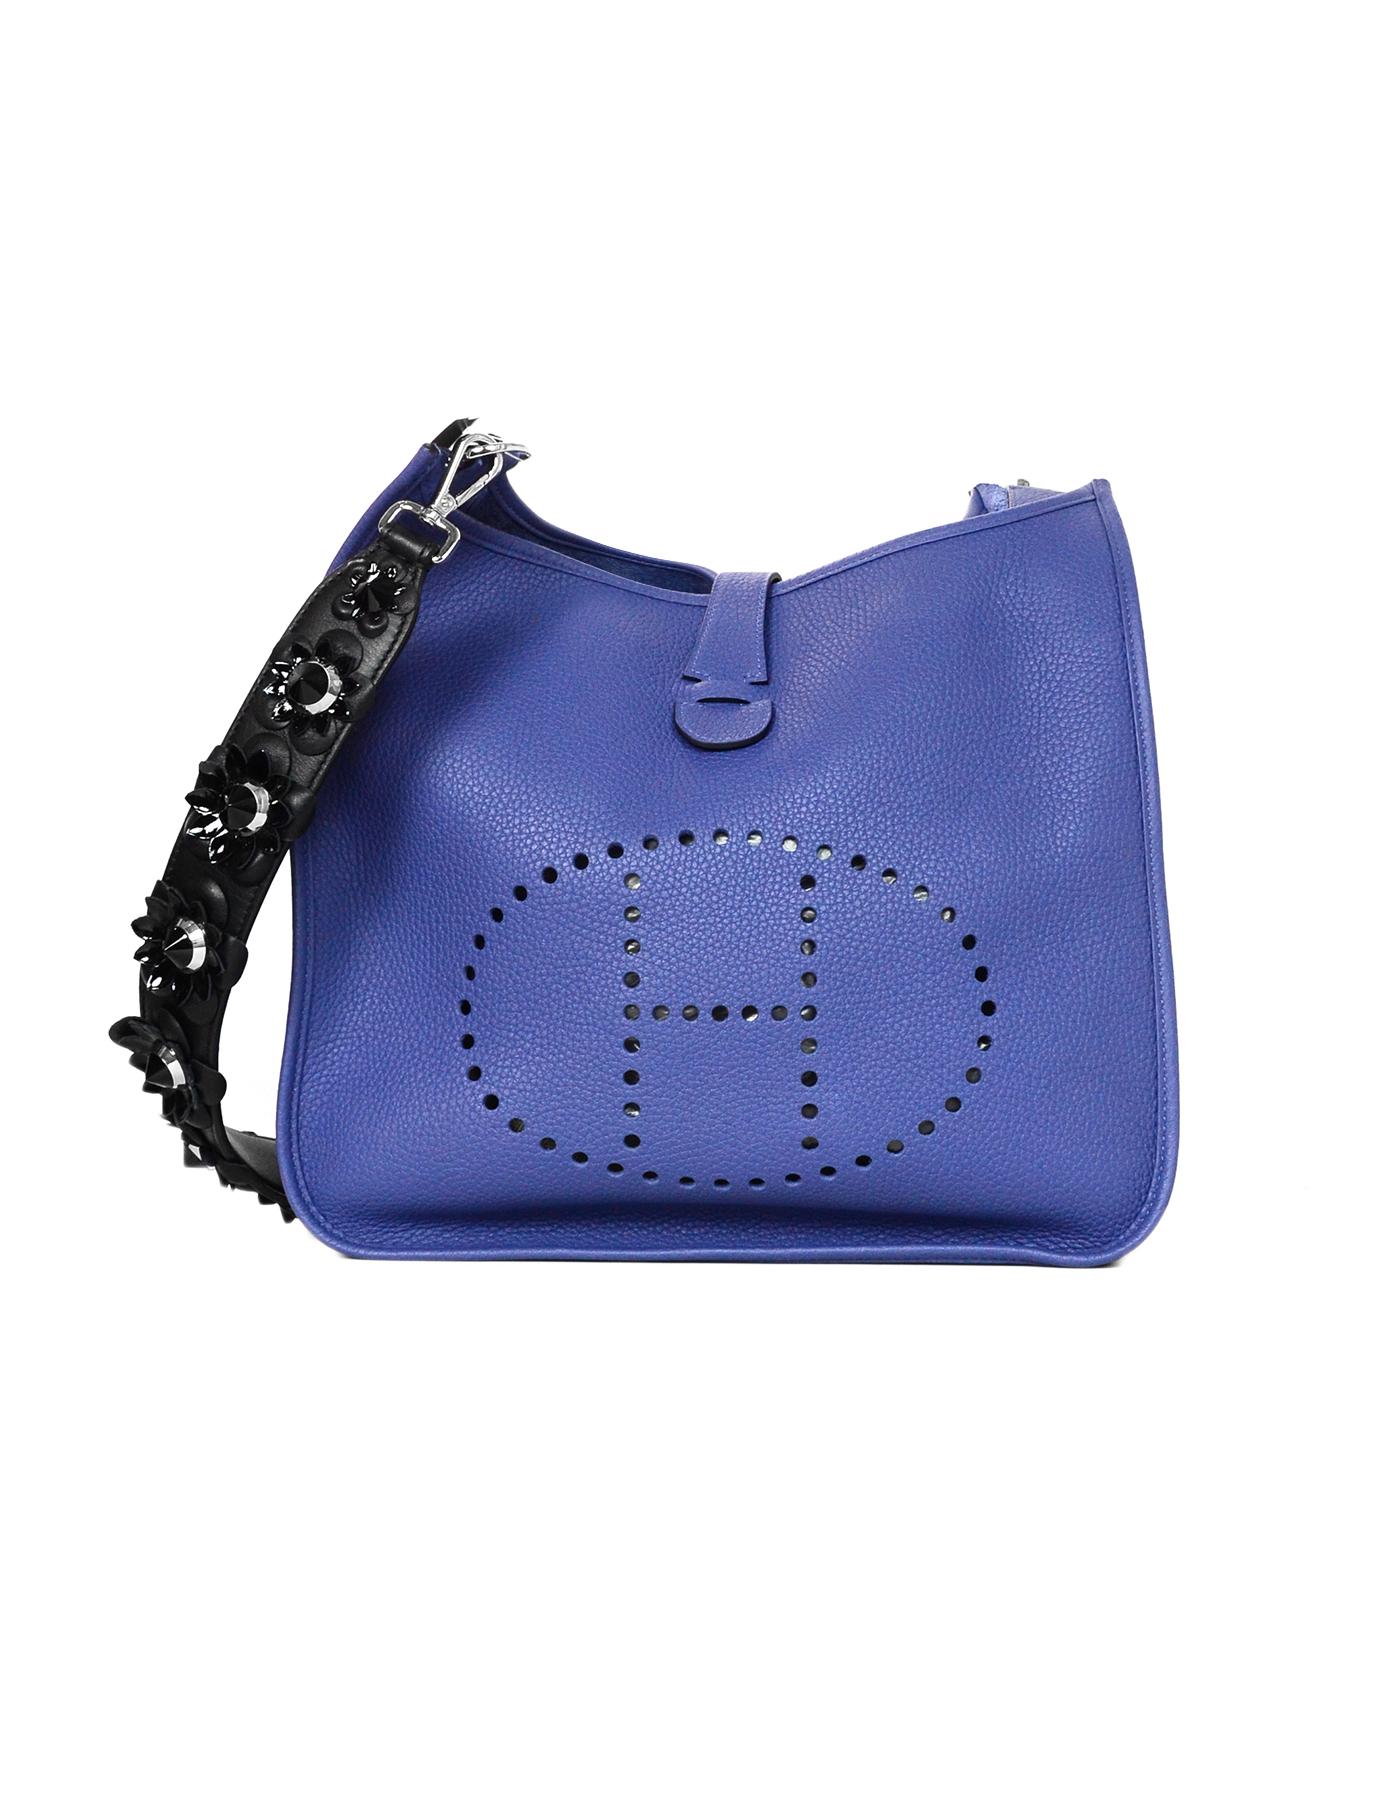 Fendi Black Leather Studded Flower Flowerland Strap You Bag Strap
Strap Only, Pictured with Item #100-14156 Hermes Blue Brighton Clemence Evelyne III 33 GM Bag

Color: Black, silver
Hardware: Silvertone
Materials: Leather and metal 
Lining: Black